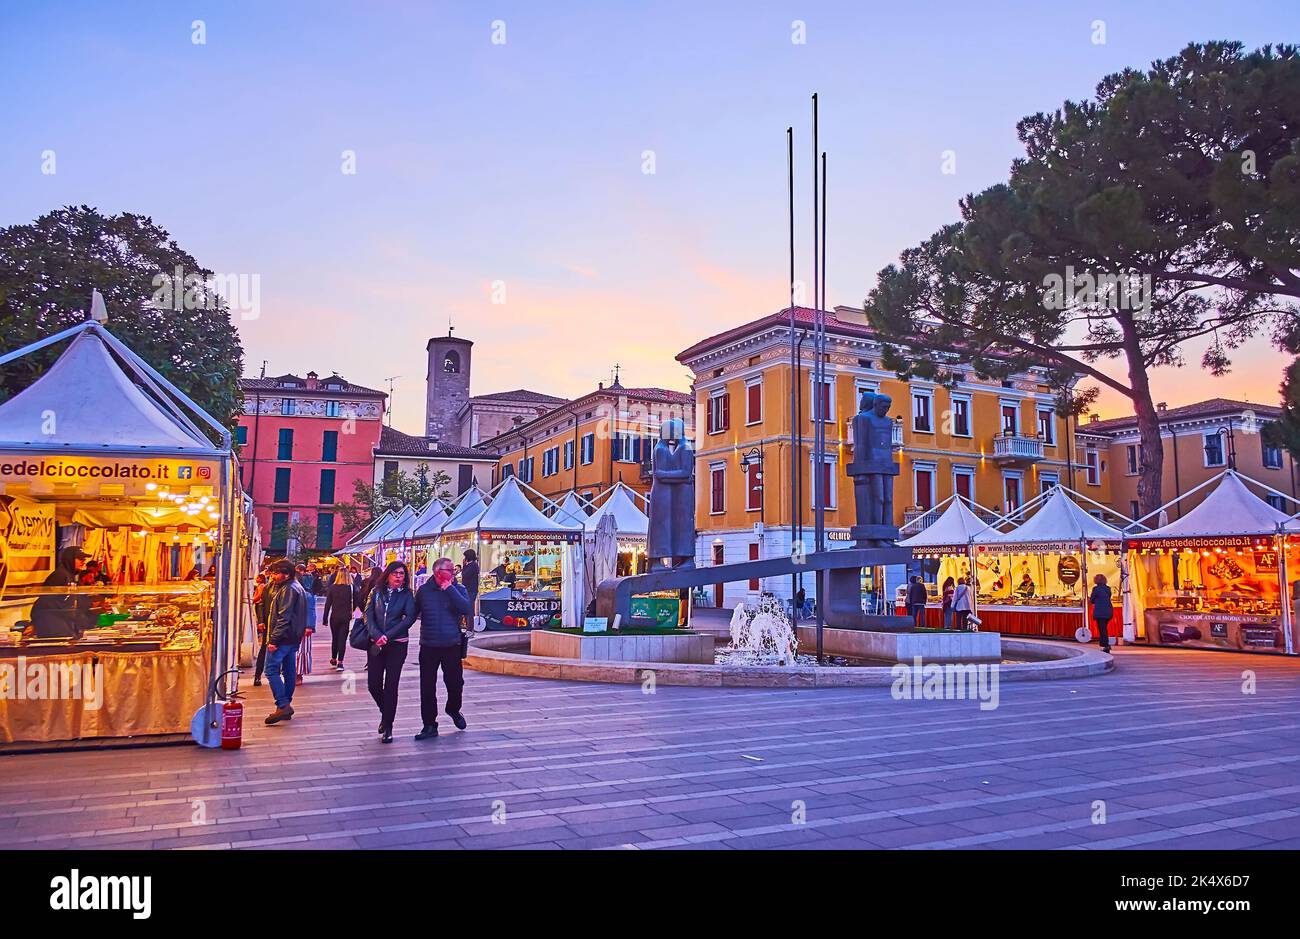 DESENZANO DEL GARDA, ITALY - APRIL 10, 2022: The evening Piazza Cappelletti with tents of tourist market and vintage houses, on April 10 in Desenzano Stock Photo